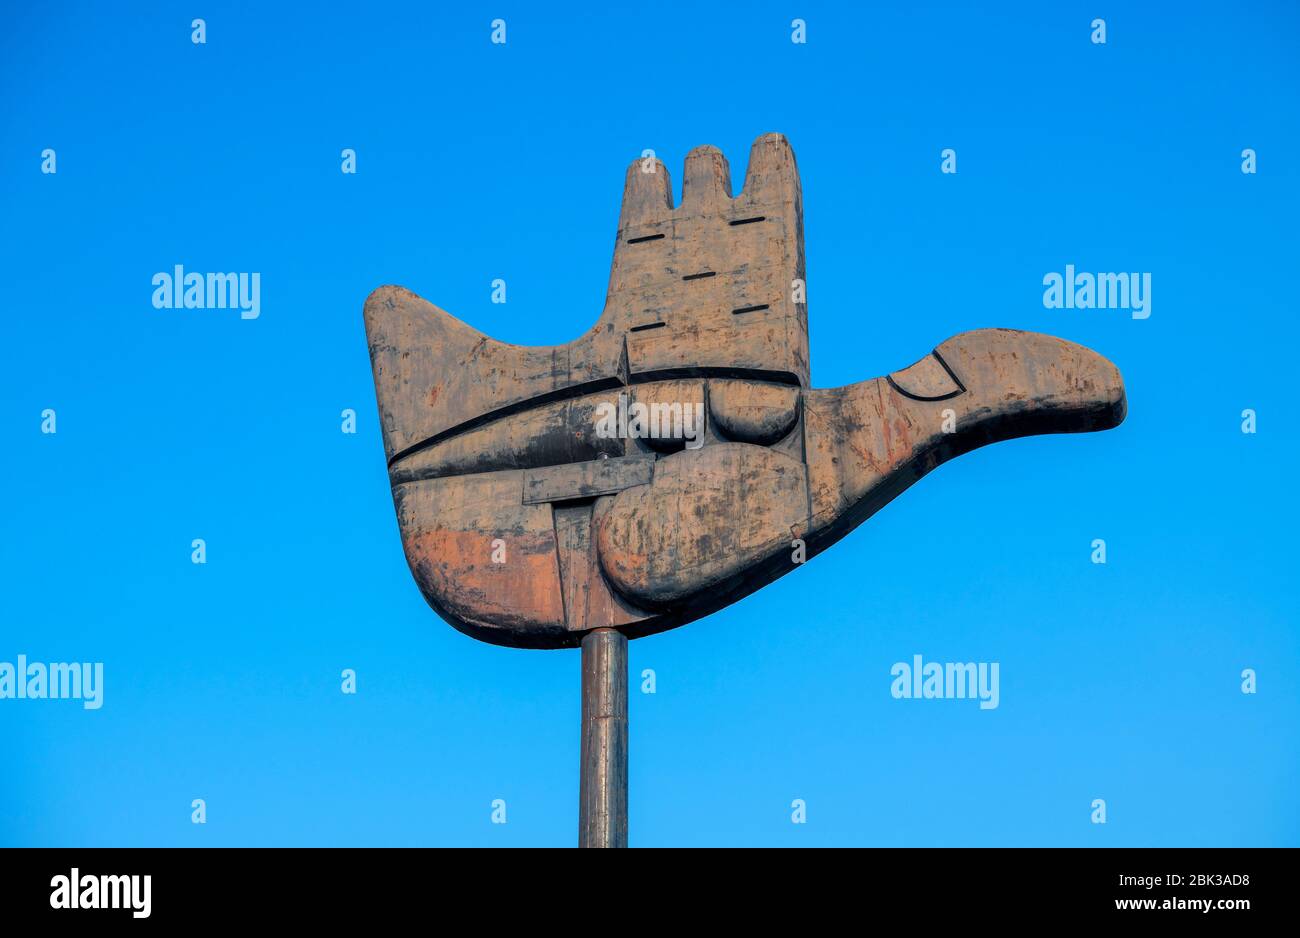 Open Hand Monument against blur sky  blue sky designed by Le Corbusier  Chandigarh India Stock Photo